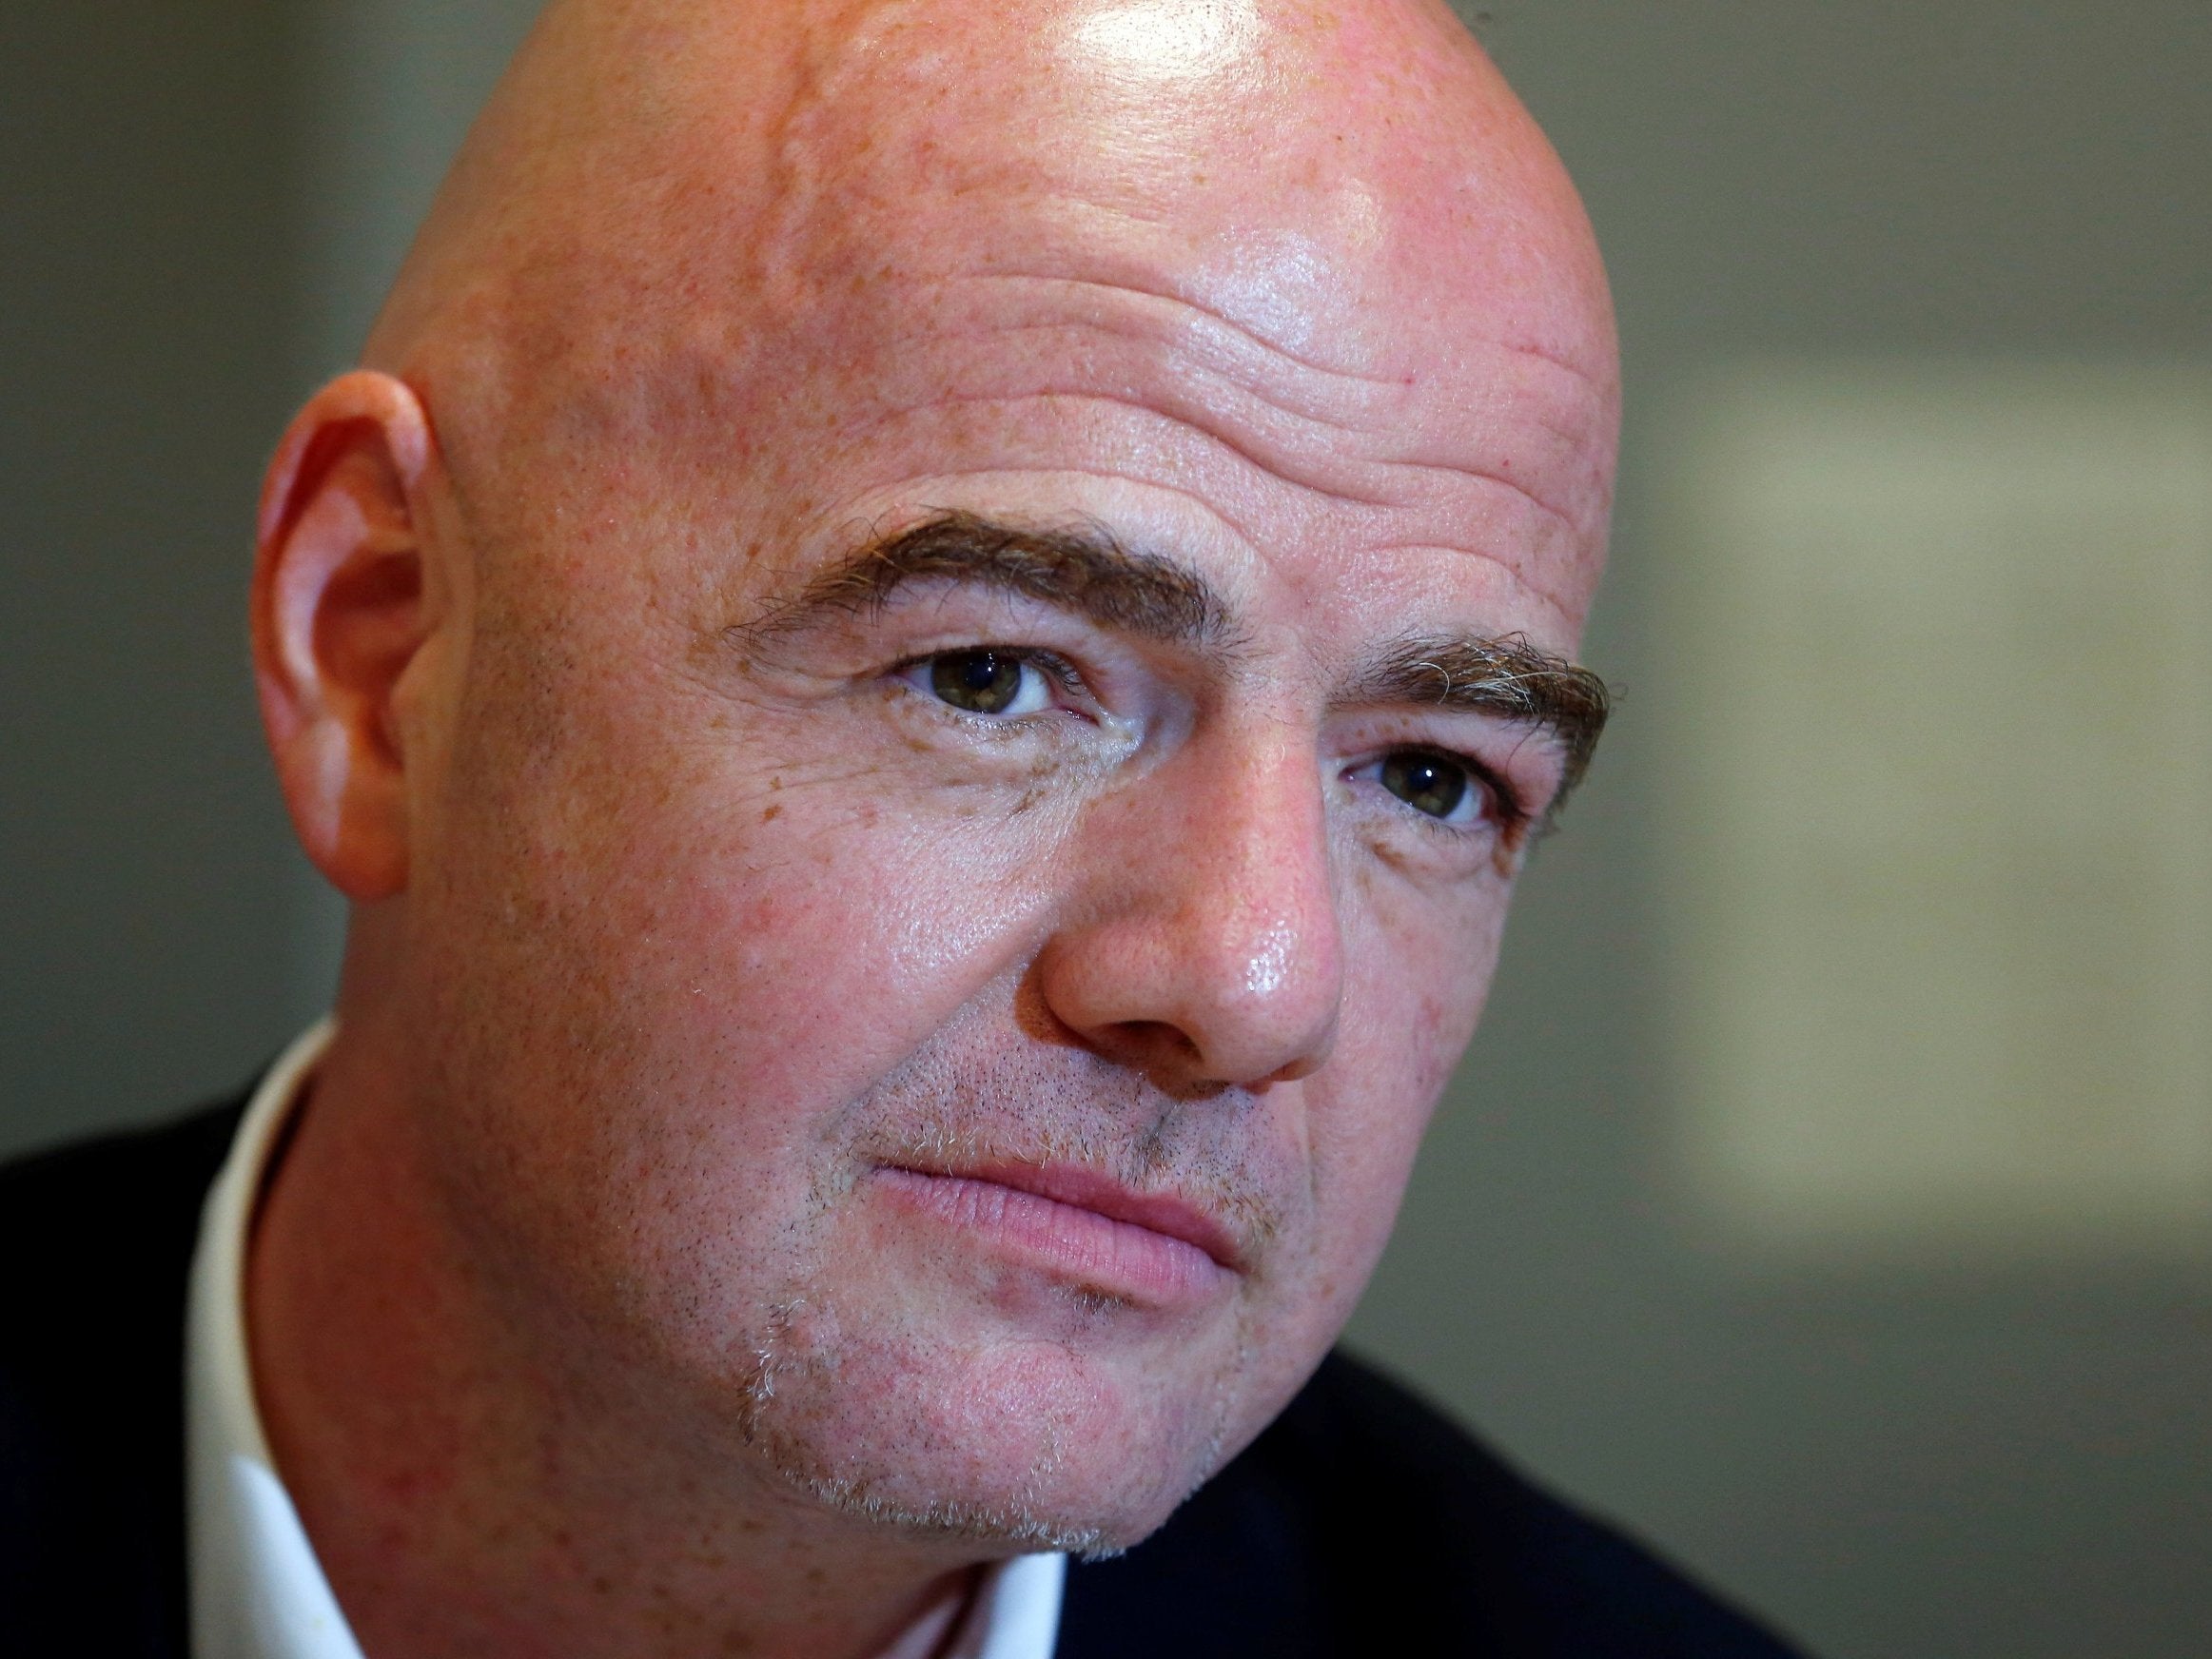 Infantino has suggested the 2022 World Cup could be expanded outside of Qatar